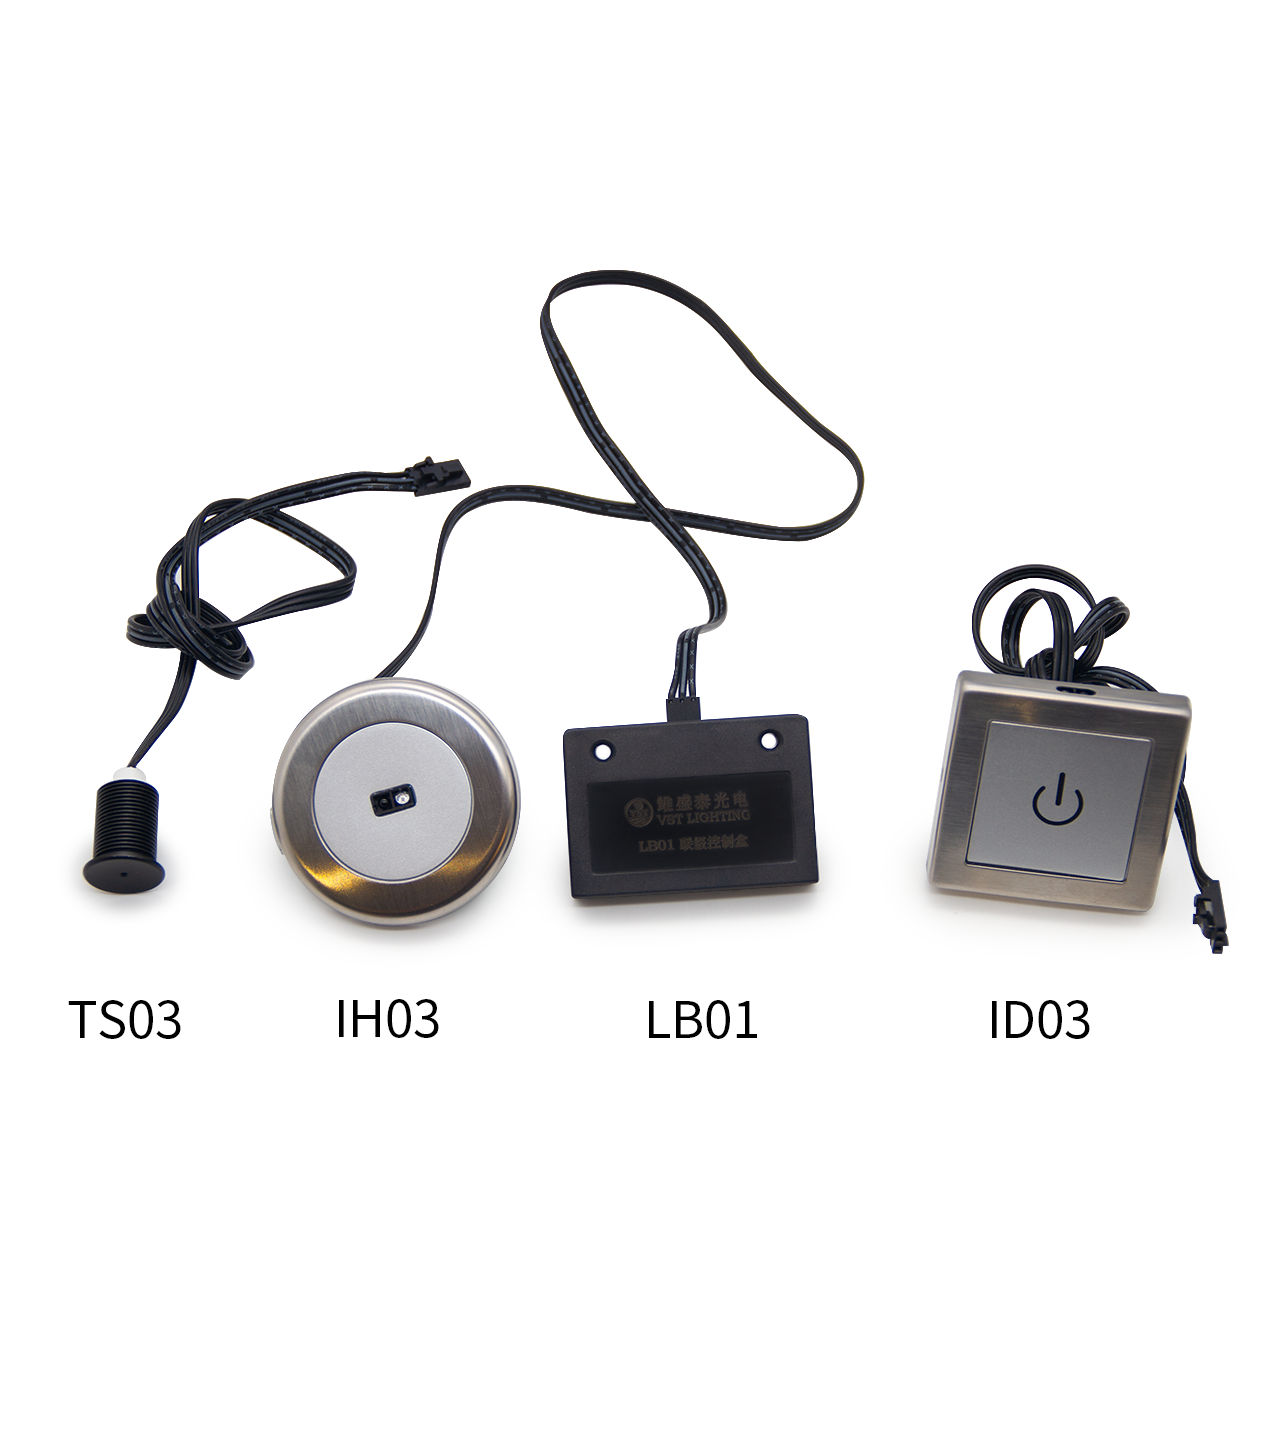 Send inquiry for 12V IR Hand Wave Sensor Switch 30W High Quality Home Light Switch to high quality IR Hand Wave Sensor Switch supplier. Wholesale Home Light Switch directly from China IR Hand Wave Sensor Switch manufacturers/exporters. Get a factory sale price list and become a distributor/agent-vstled.com.